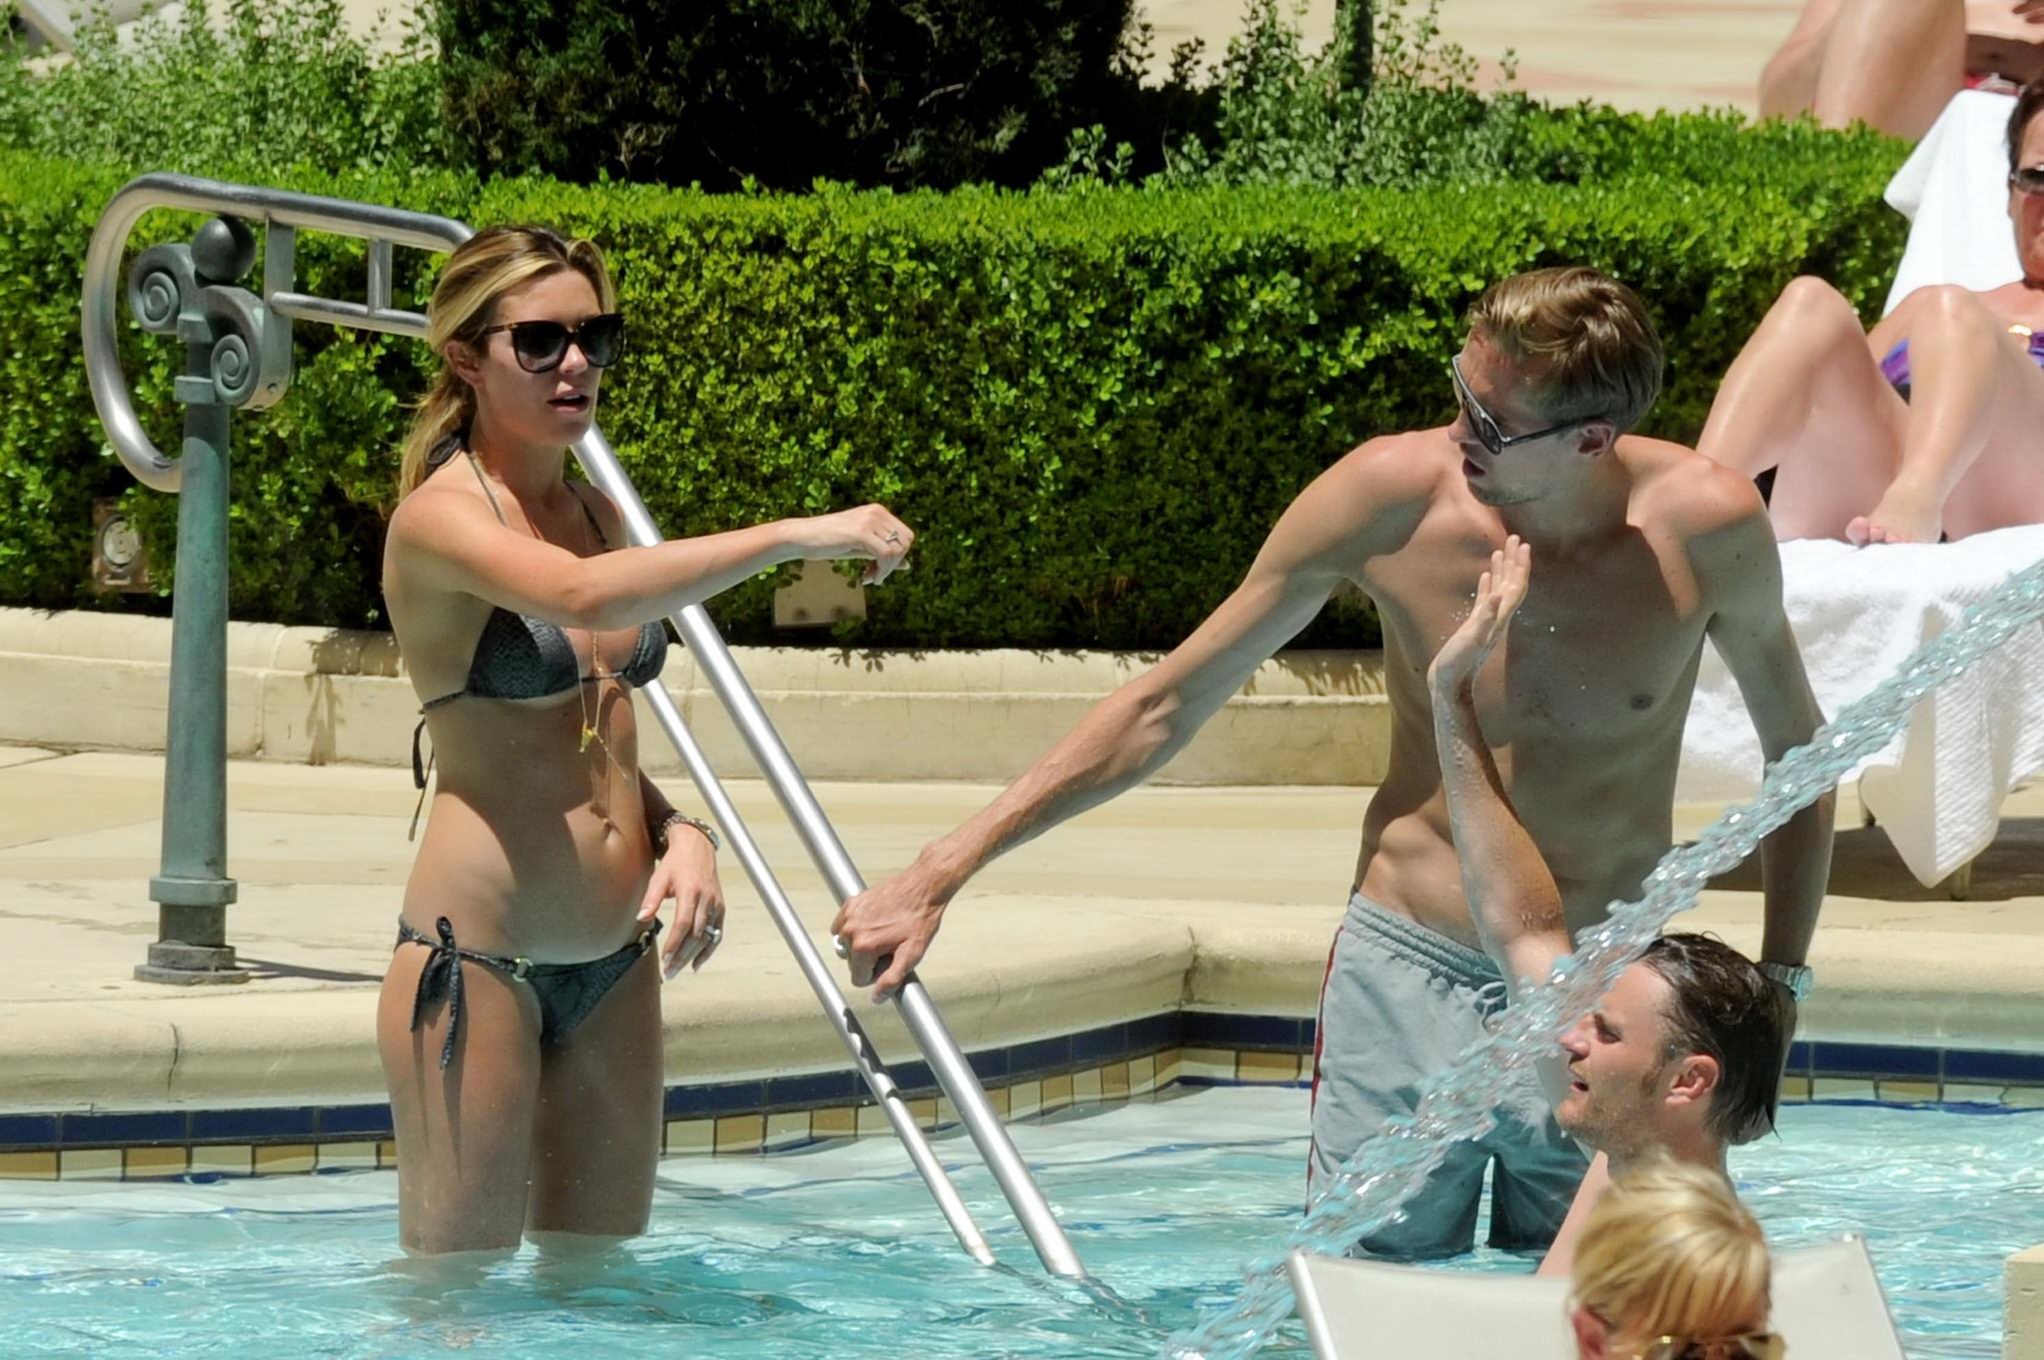 Abigail Clancy showing off her bikini body at the pool in Las Vegas #75193919